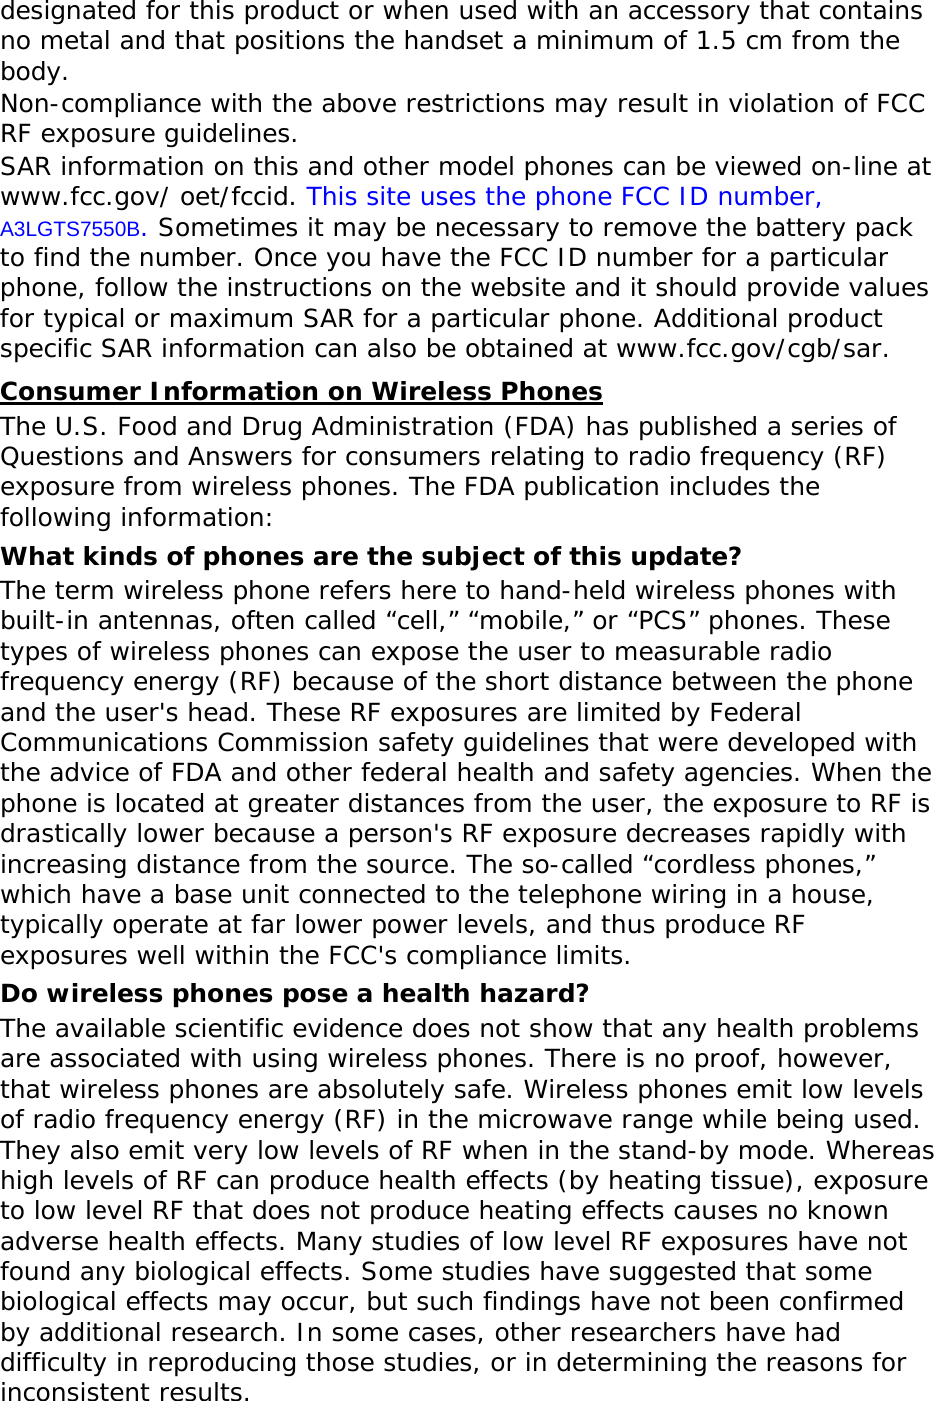 designated for this product or when used with an accessory that contains no metal and that positions the handset a minimum of 1.5 cm from the body.  Non-compliance with the above restrictions may result in violation of FCC RF exposure guidelines. SAR information on this and other model phones can be viewed on-line at www.fcc.gov/ oet/fccid. This site uses the phone FCC ID number, A3LGTS7550B. Sometimes it may be necessary to remove the battery pack to find the number. Once you have the FCC ID number for a particular phone, follow the instructions on the website and it should provide values for typical or maximum SAR for a particular phone. Additional product specific SAR information can also be obtained at www.fcc.gov/cgb/sar. Consumer Information on Wireless Phones The U.S. Food and Drug Administration (FDA) has published a series of Questions and Answers for consumers relating to radio frequency (RF) exposure from wireless phones. The FDA publication includes the following information: What kinds of phones are the subject of this update? The term wireless phone refers here to hand-held wireless phones with built-in antennas, often called “cell,” “mobile,” or “PCS” phones. These types of wireless phones can expose the user to measurable radio frequency energy (RF) because of the short distance between the phone and the user&apos;s head. These RF exposures are limited by Federal Communications Commission safety guidelines that were developed with the advice of FDA and other federal health and safety agencies. When the phone is located at greater distances from the user, the exposure to RF is drastically lower because a person&apos;s RF exposure decreases rapidly with increasing distance from the source. The so-called “cordless phones,” which have a base unit connected to the telephone wiring in a house, typically operate at far lower power levels, and thus produce RF exposures well within the FCC&apos;s compliance limits. Do wireless phones pose a health hazard? The available scientific evidence does not show that any health problems are associated with using wireless phones. There is no proof, however, that wireless phones are absolutely safe. Wireless phones emit low levels of radio frequency energy (RF) in the microwave range while being used. They also emit very low levels of RF when in the stand-by mode. Whereas high levels of RF can produce health effects (by heating tissue), exposure to low level RF that does not produce heating effects causes no known adverse health effects. Many studies of low level RF exposures have not found any biological effects. Some studies have suggested that some biological effects may occur, but such findings have not been confirmed by additional research. In some cases, other researchers have had difficulty in reproducing those studies, or in determining the reasons for inconsistent results. 